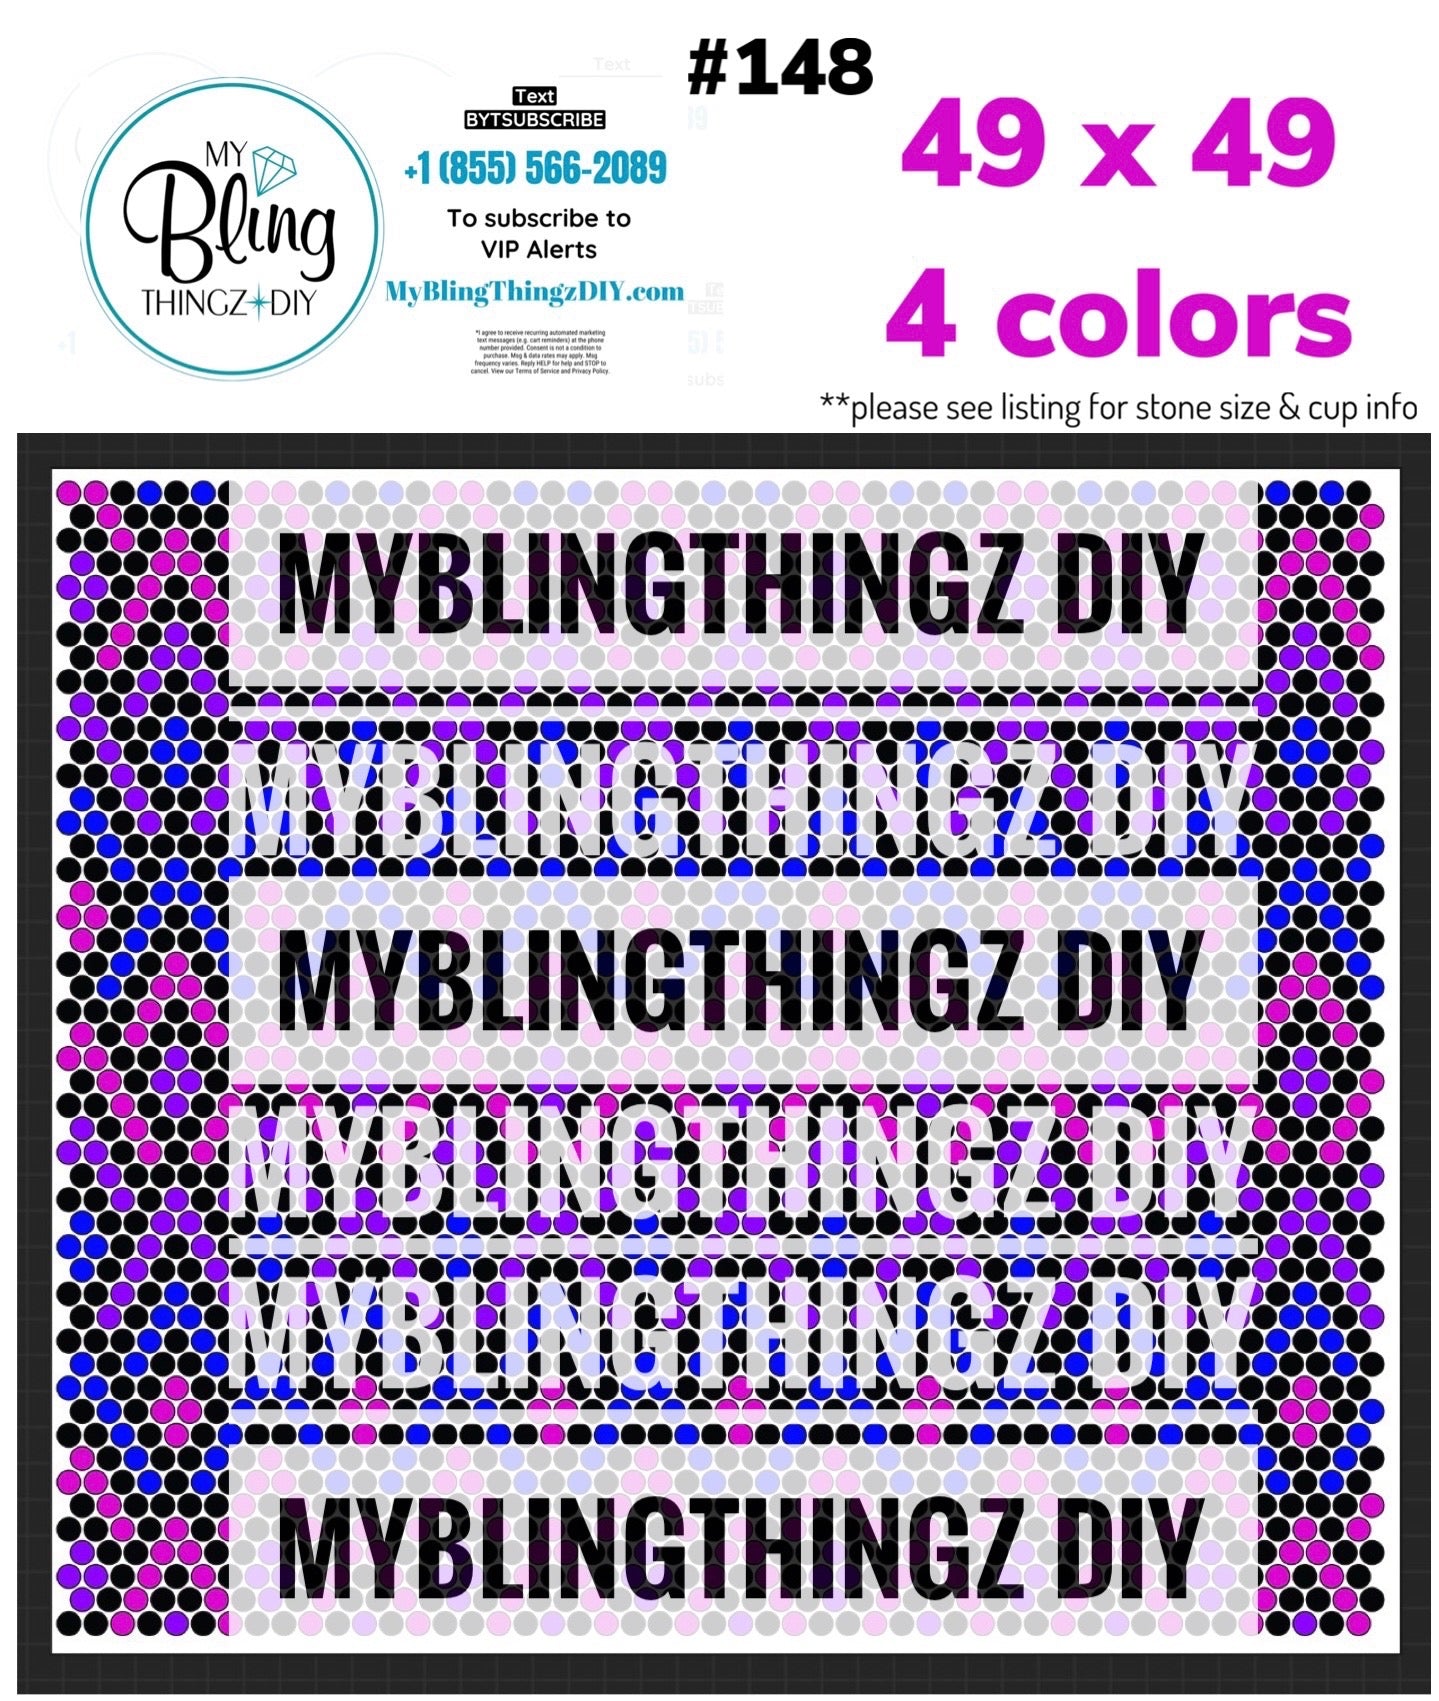 Tumbler Template Bling Box - #148 - UV Color Changing Resin